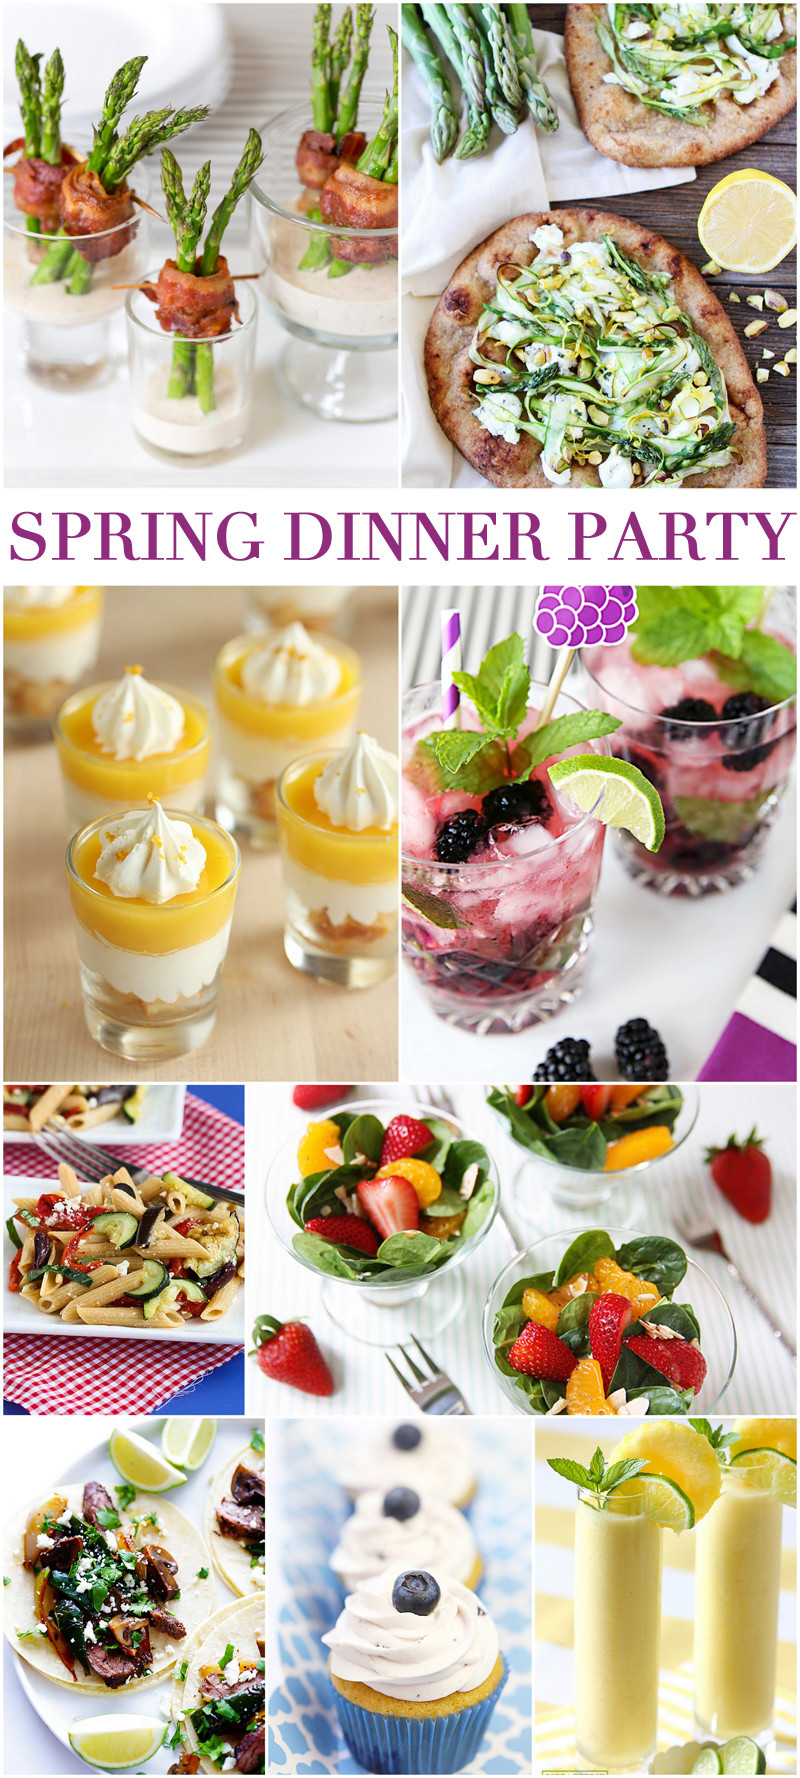 Menu Ideas For A Birthday Dinner Party
 Host a Spring Dinner Party in Style